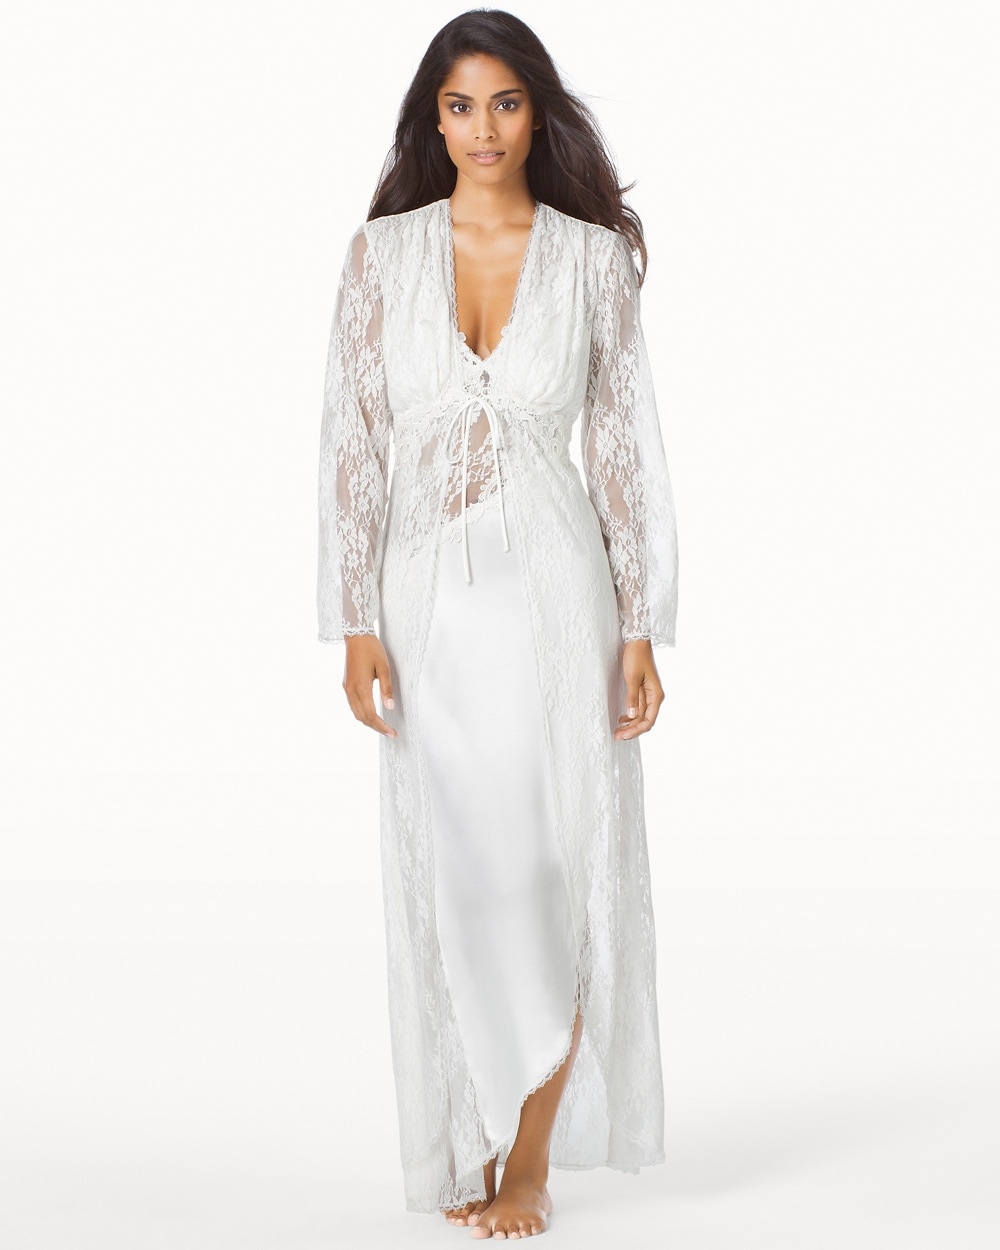 Jonquil Winter Bride Long Lace Sheer Robe